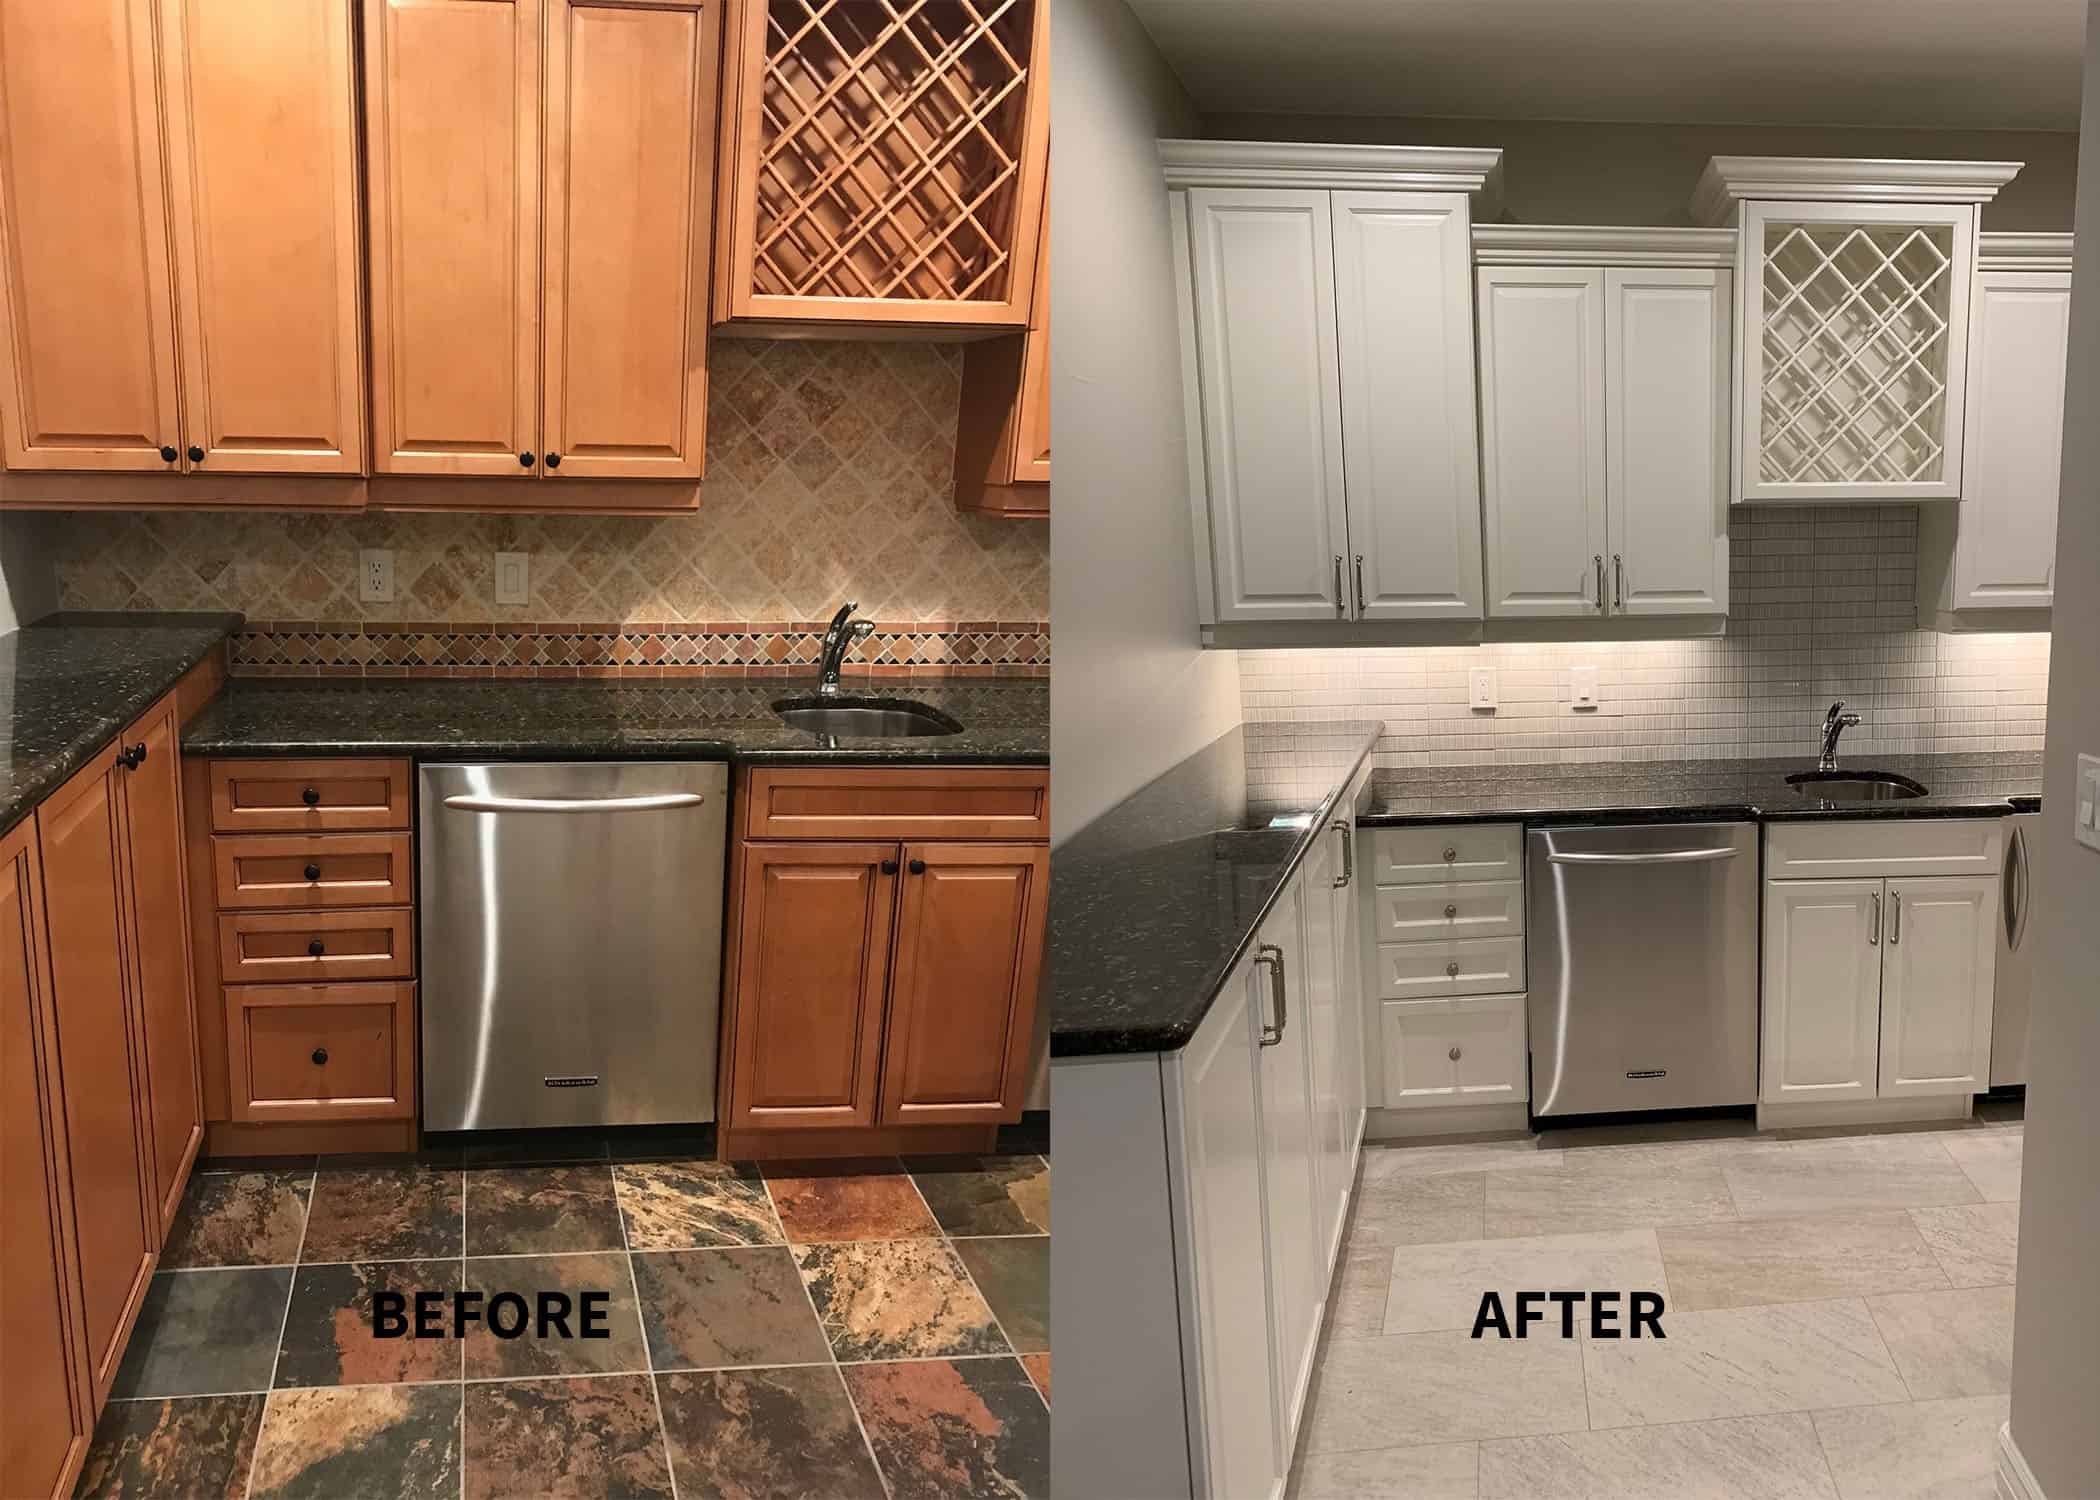  cost of repainting kitchen cabinets